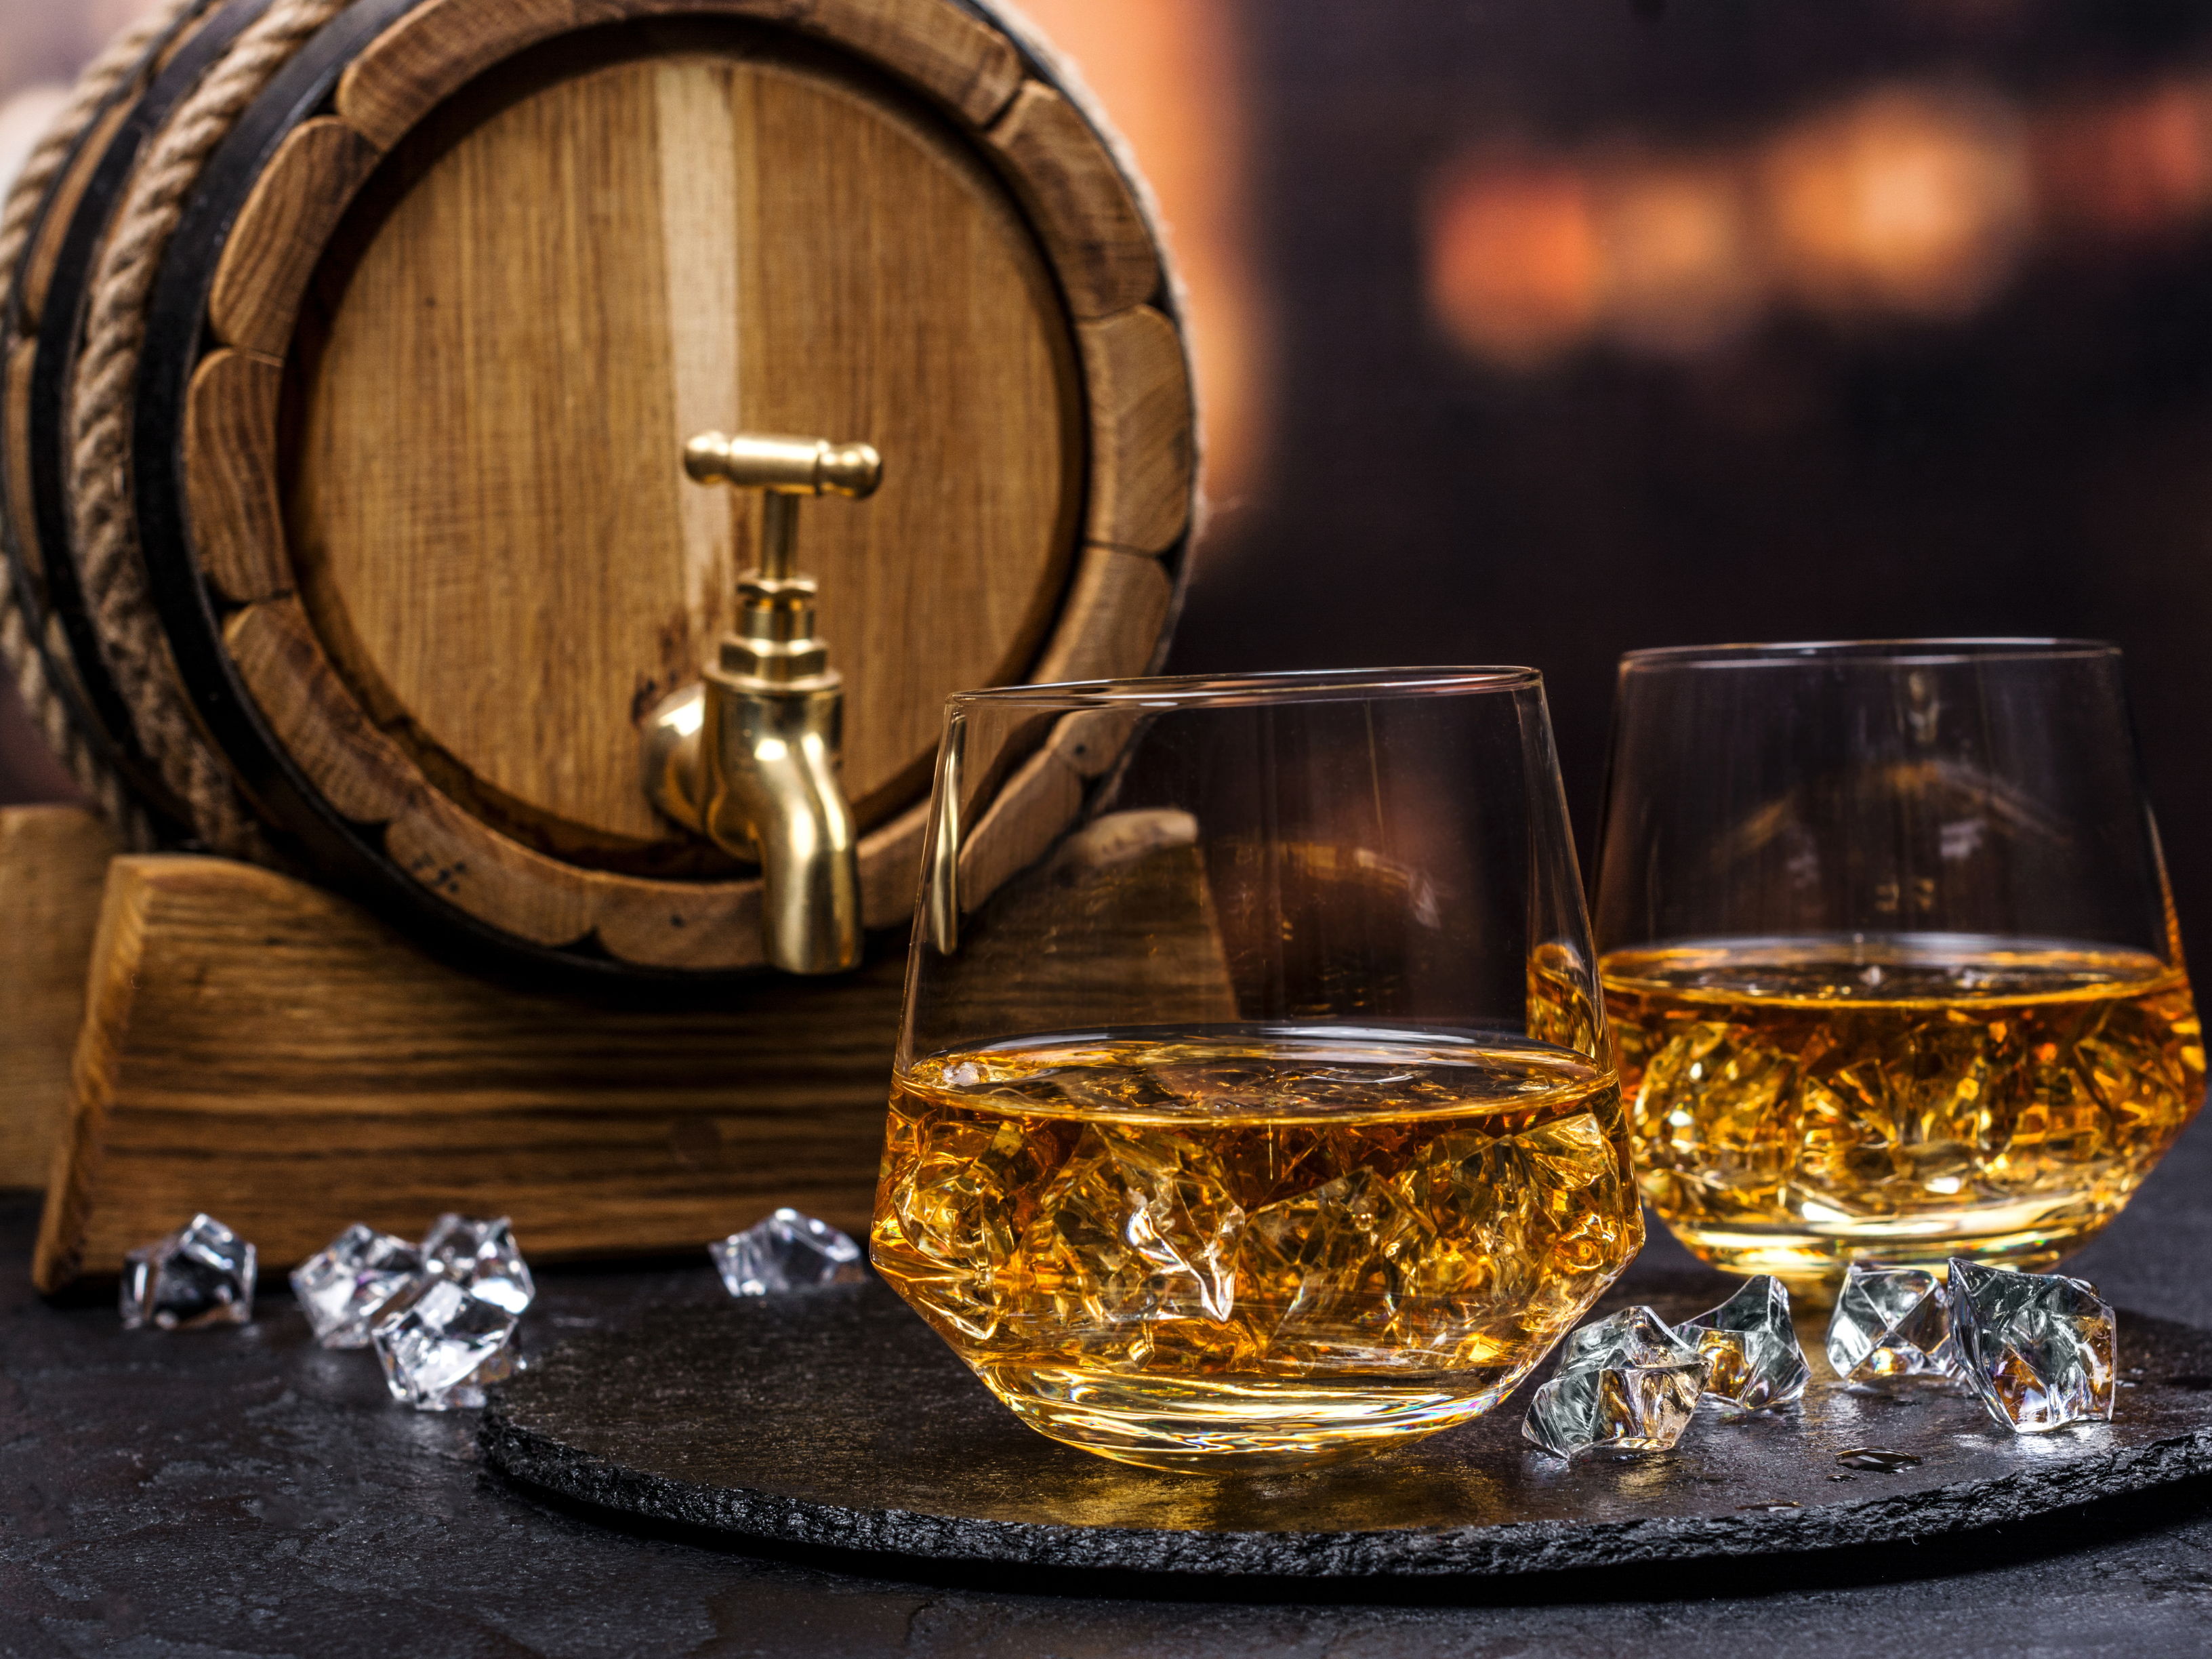 Norlan - Glassware & Accessories for the Whisky Lover